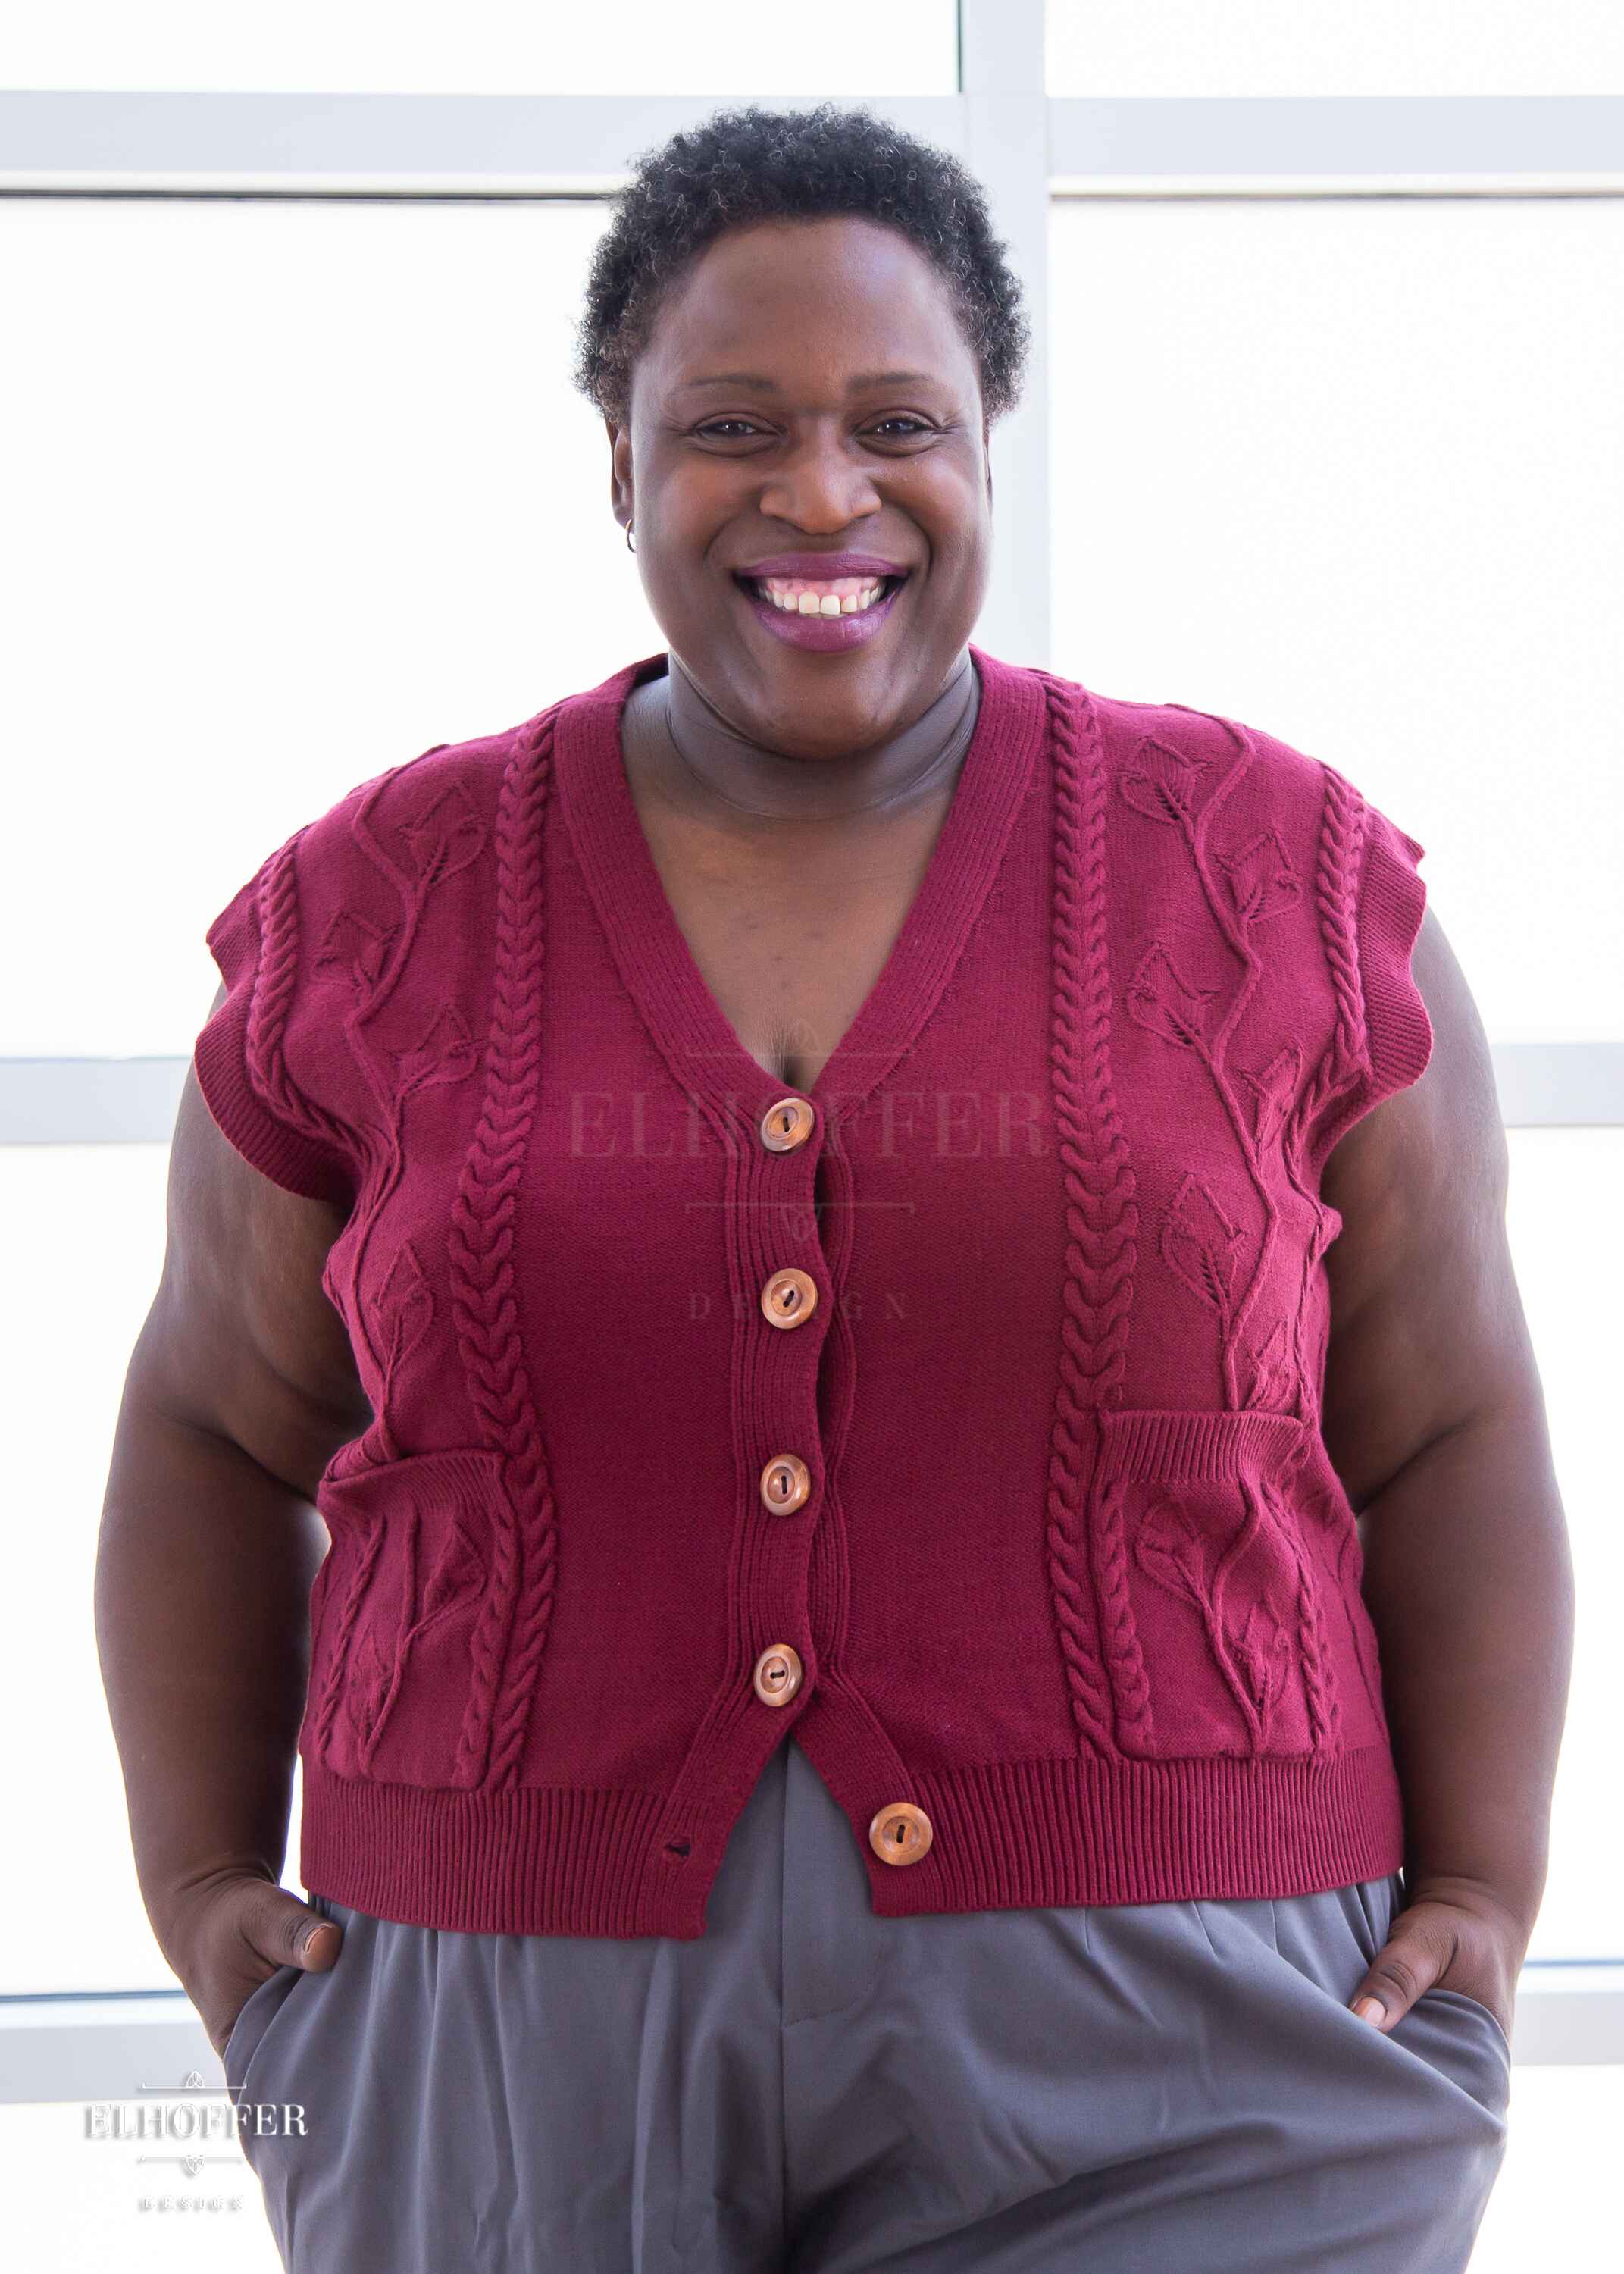 Adalgiza, a medium dark skinned 4xl model with short dark super curly hair, is smiling while wearing the L (3XL-4XL) sample of a cranberry red button up knit vest with a leafy vine and cable knit pattern, light brown buttons, and front pockets. She paired the knit vest with charcoal grey pleated trousers.